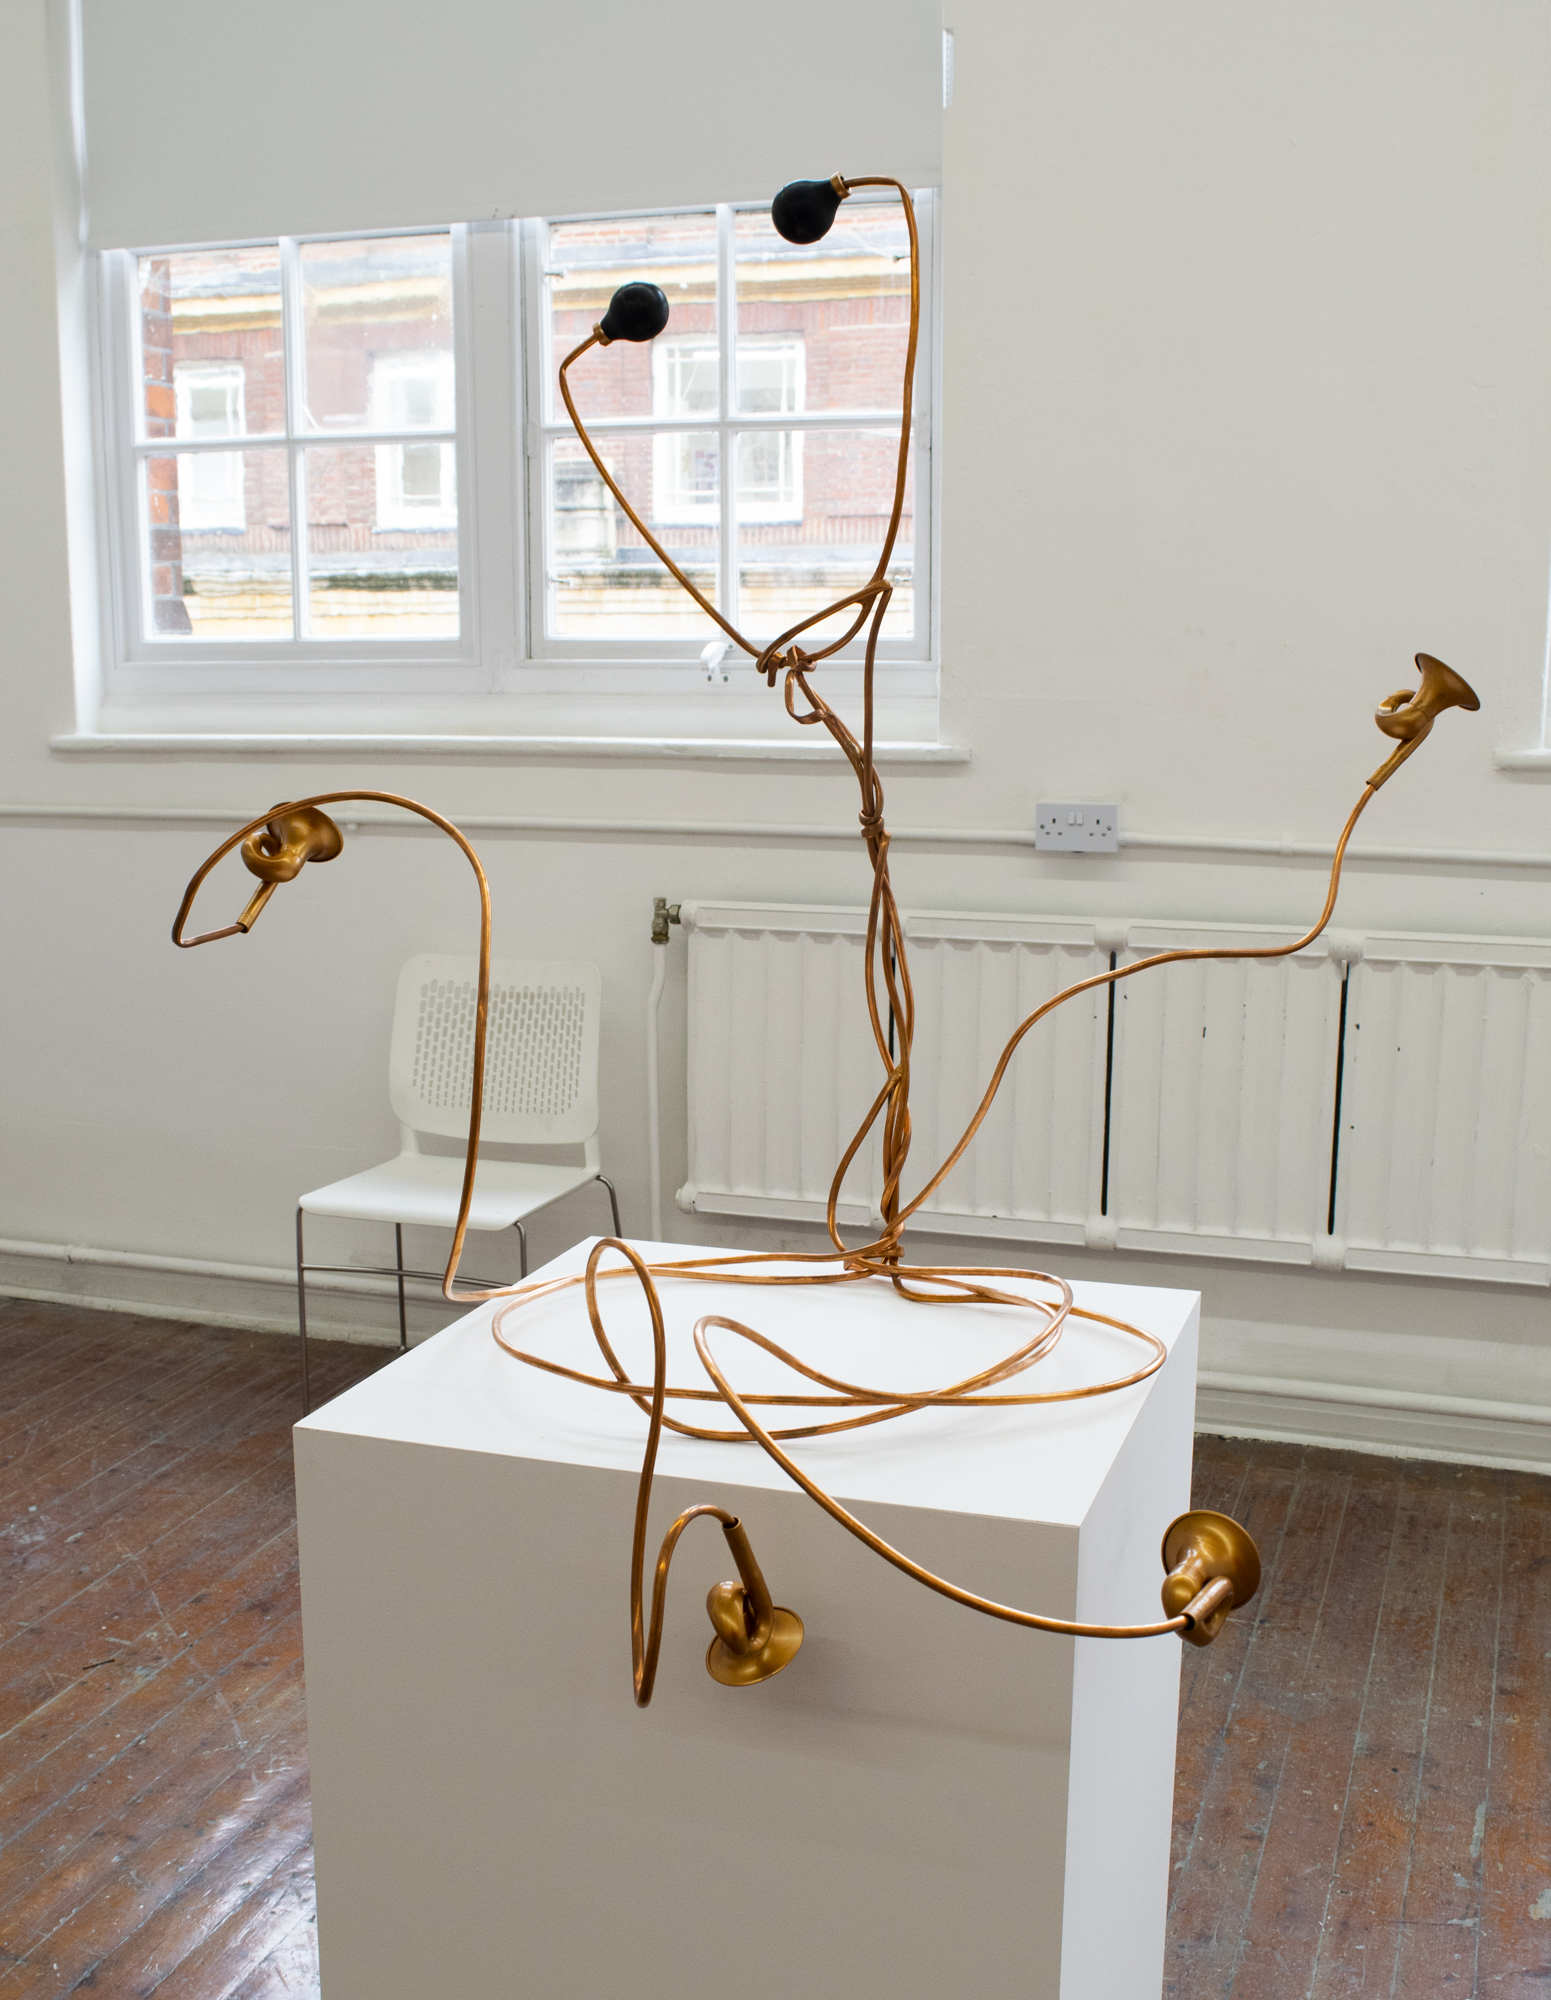 BA Fine Art work by Freya Parfitt showing a stethoscope-like sculpture made from copper microbore pipe and bicycle bells.